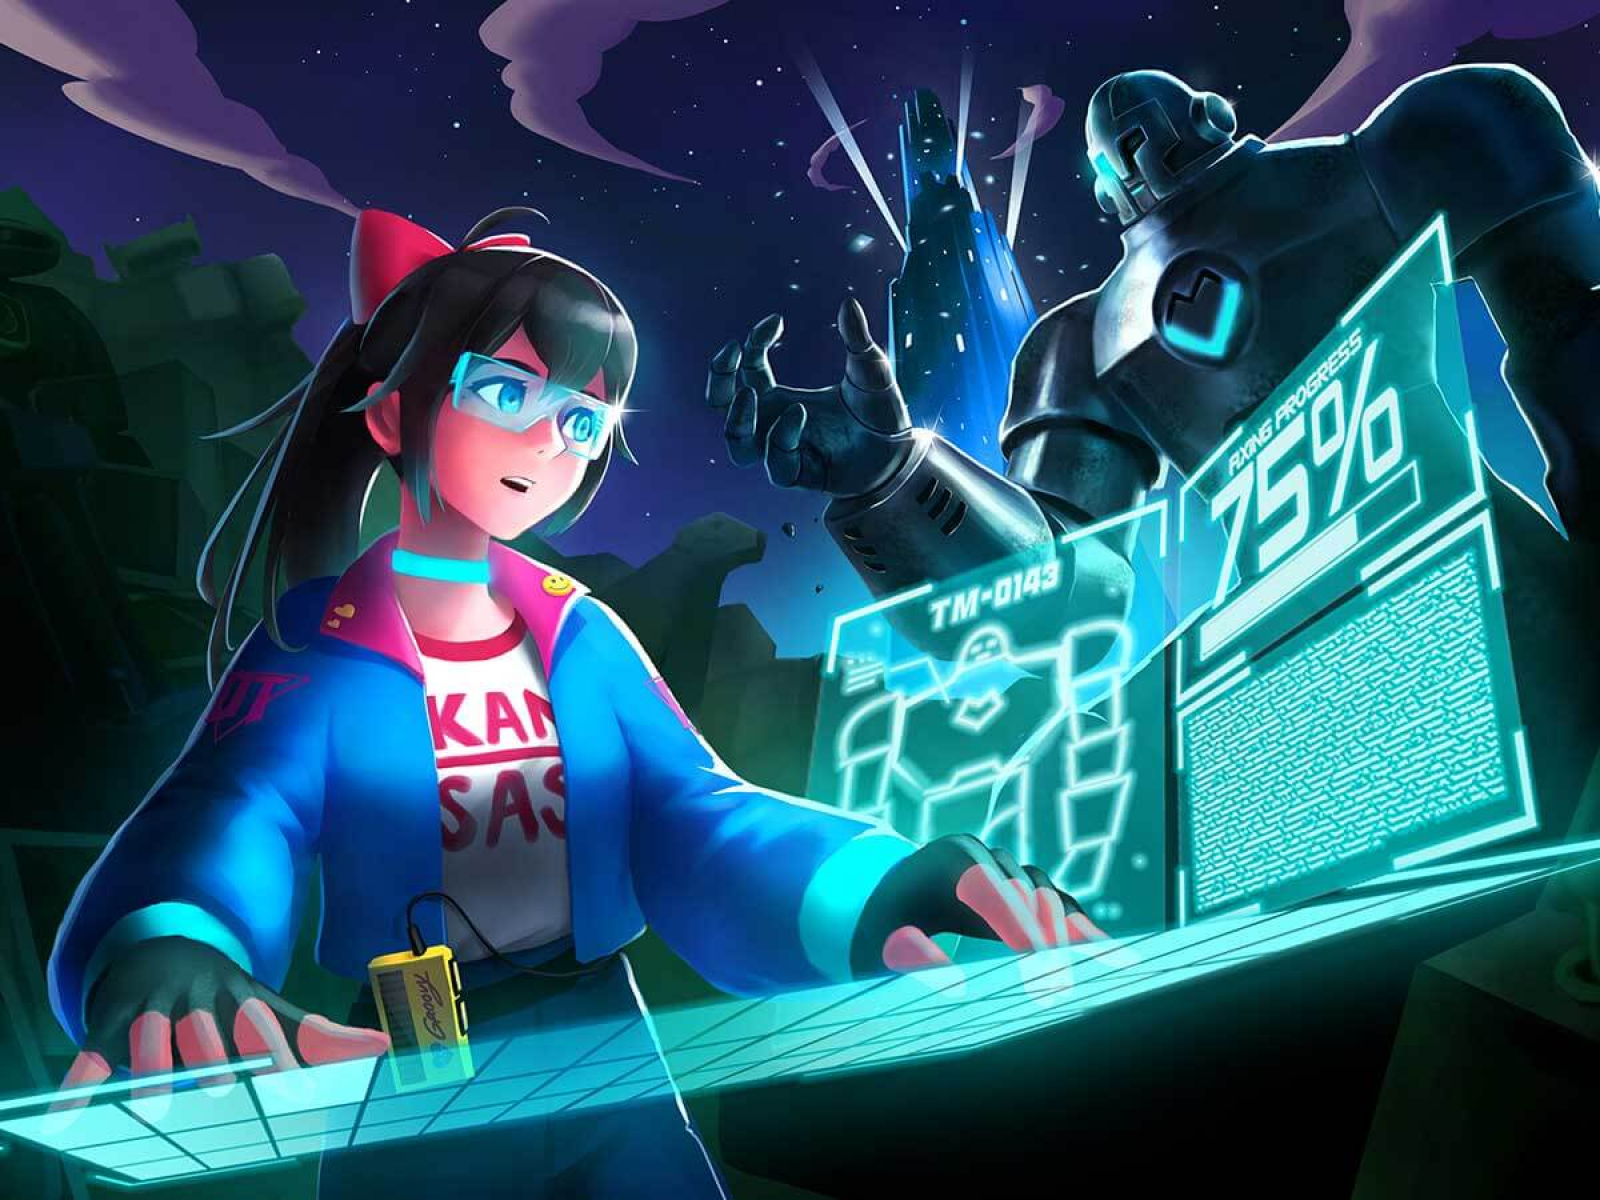 A girl works on an electronic overlay while a robot stands in the background.